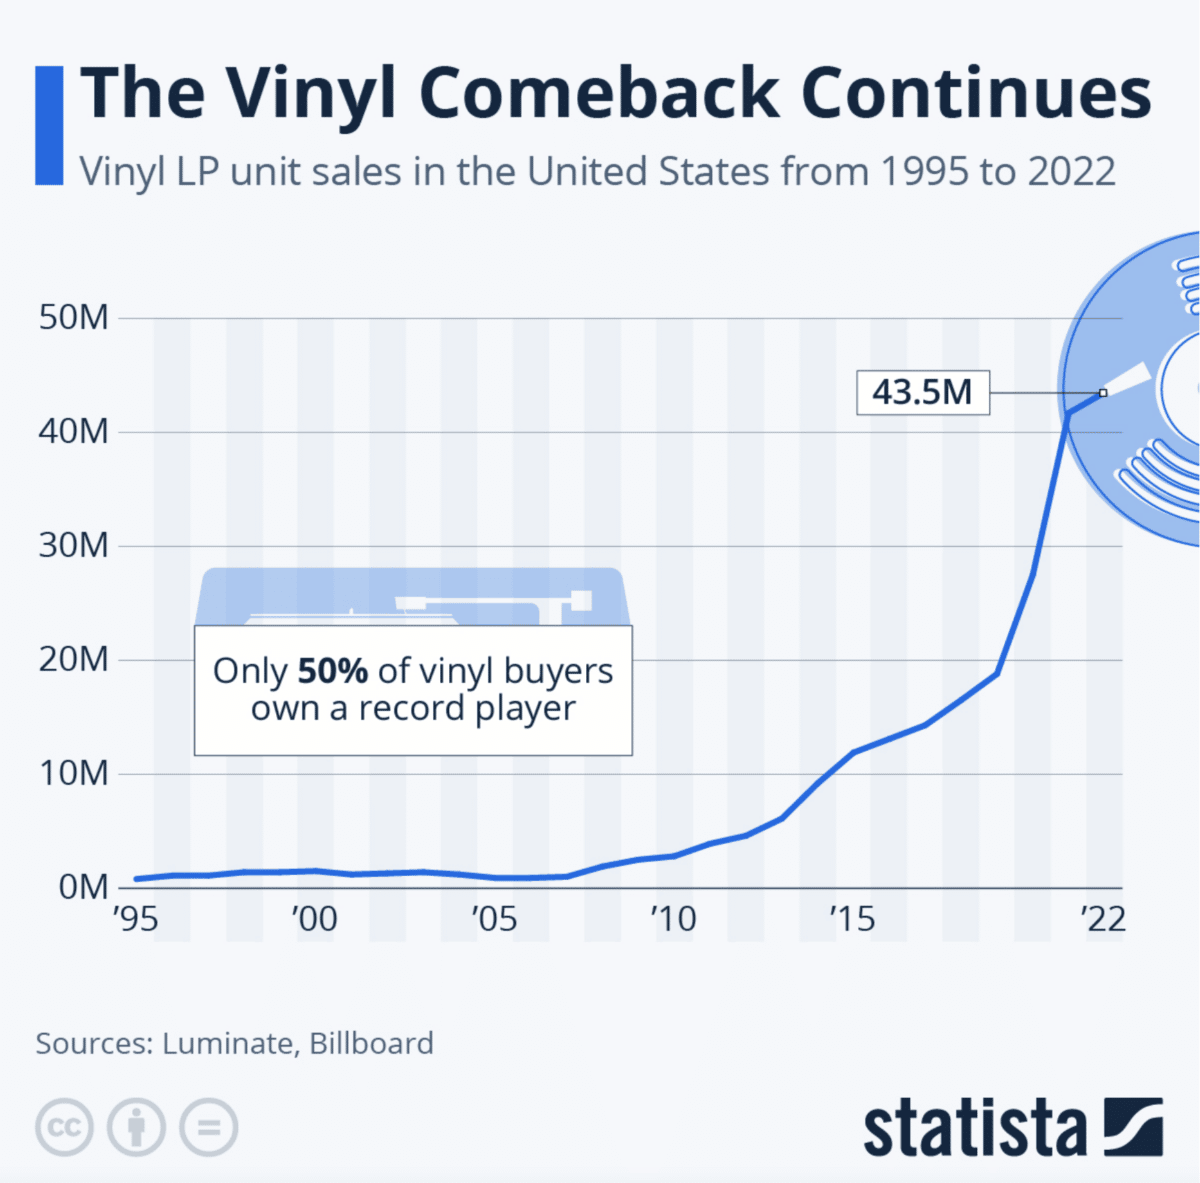 vinyl sales in US alone added up to 43.5 million sold LP’s in 2022